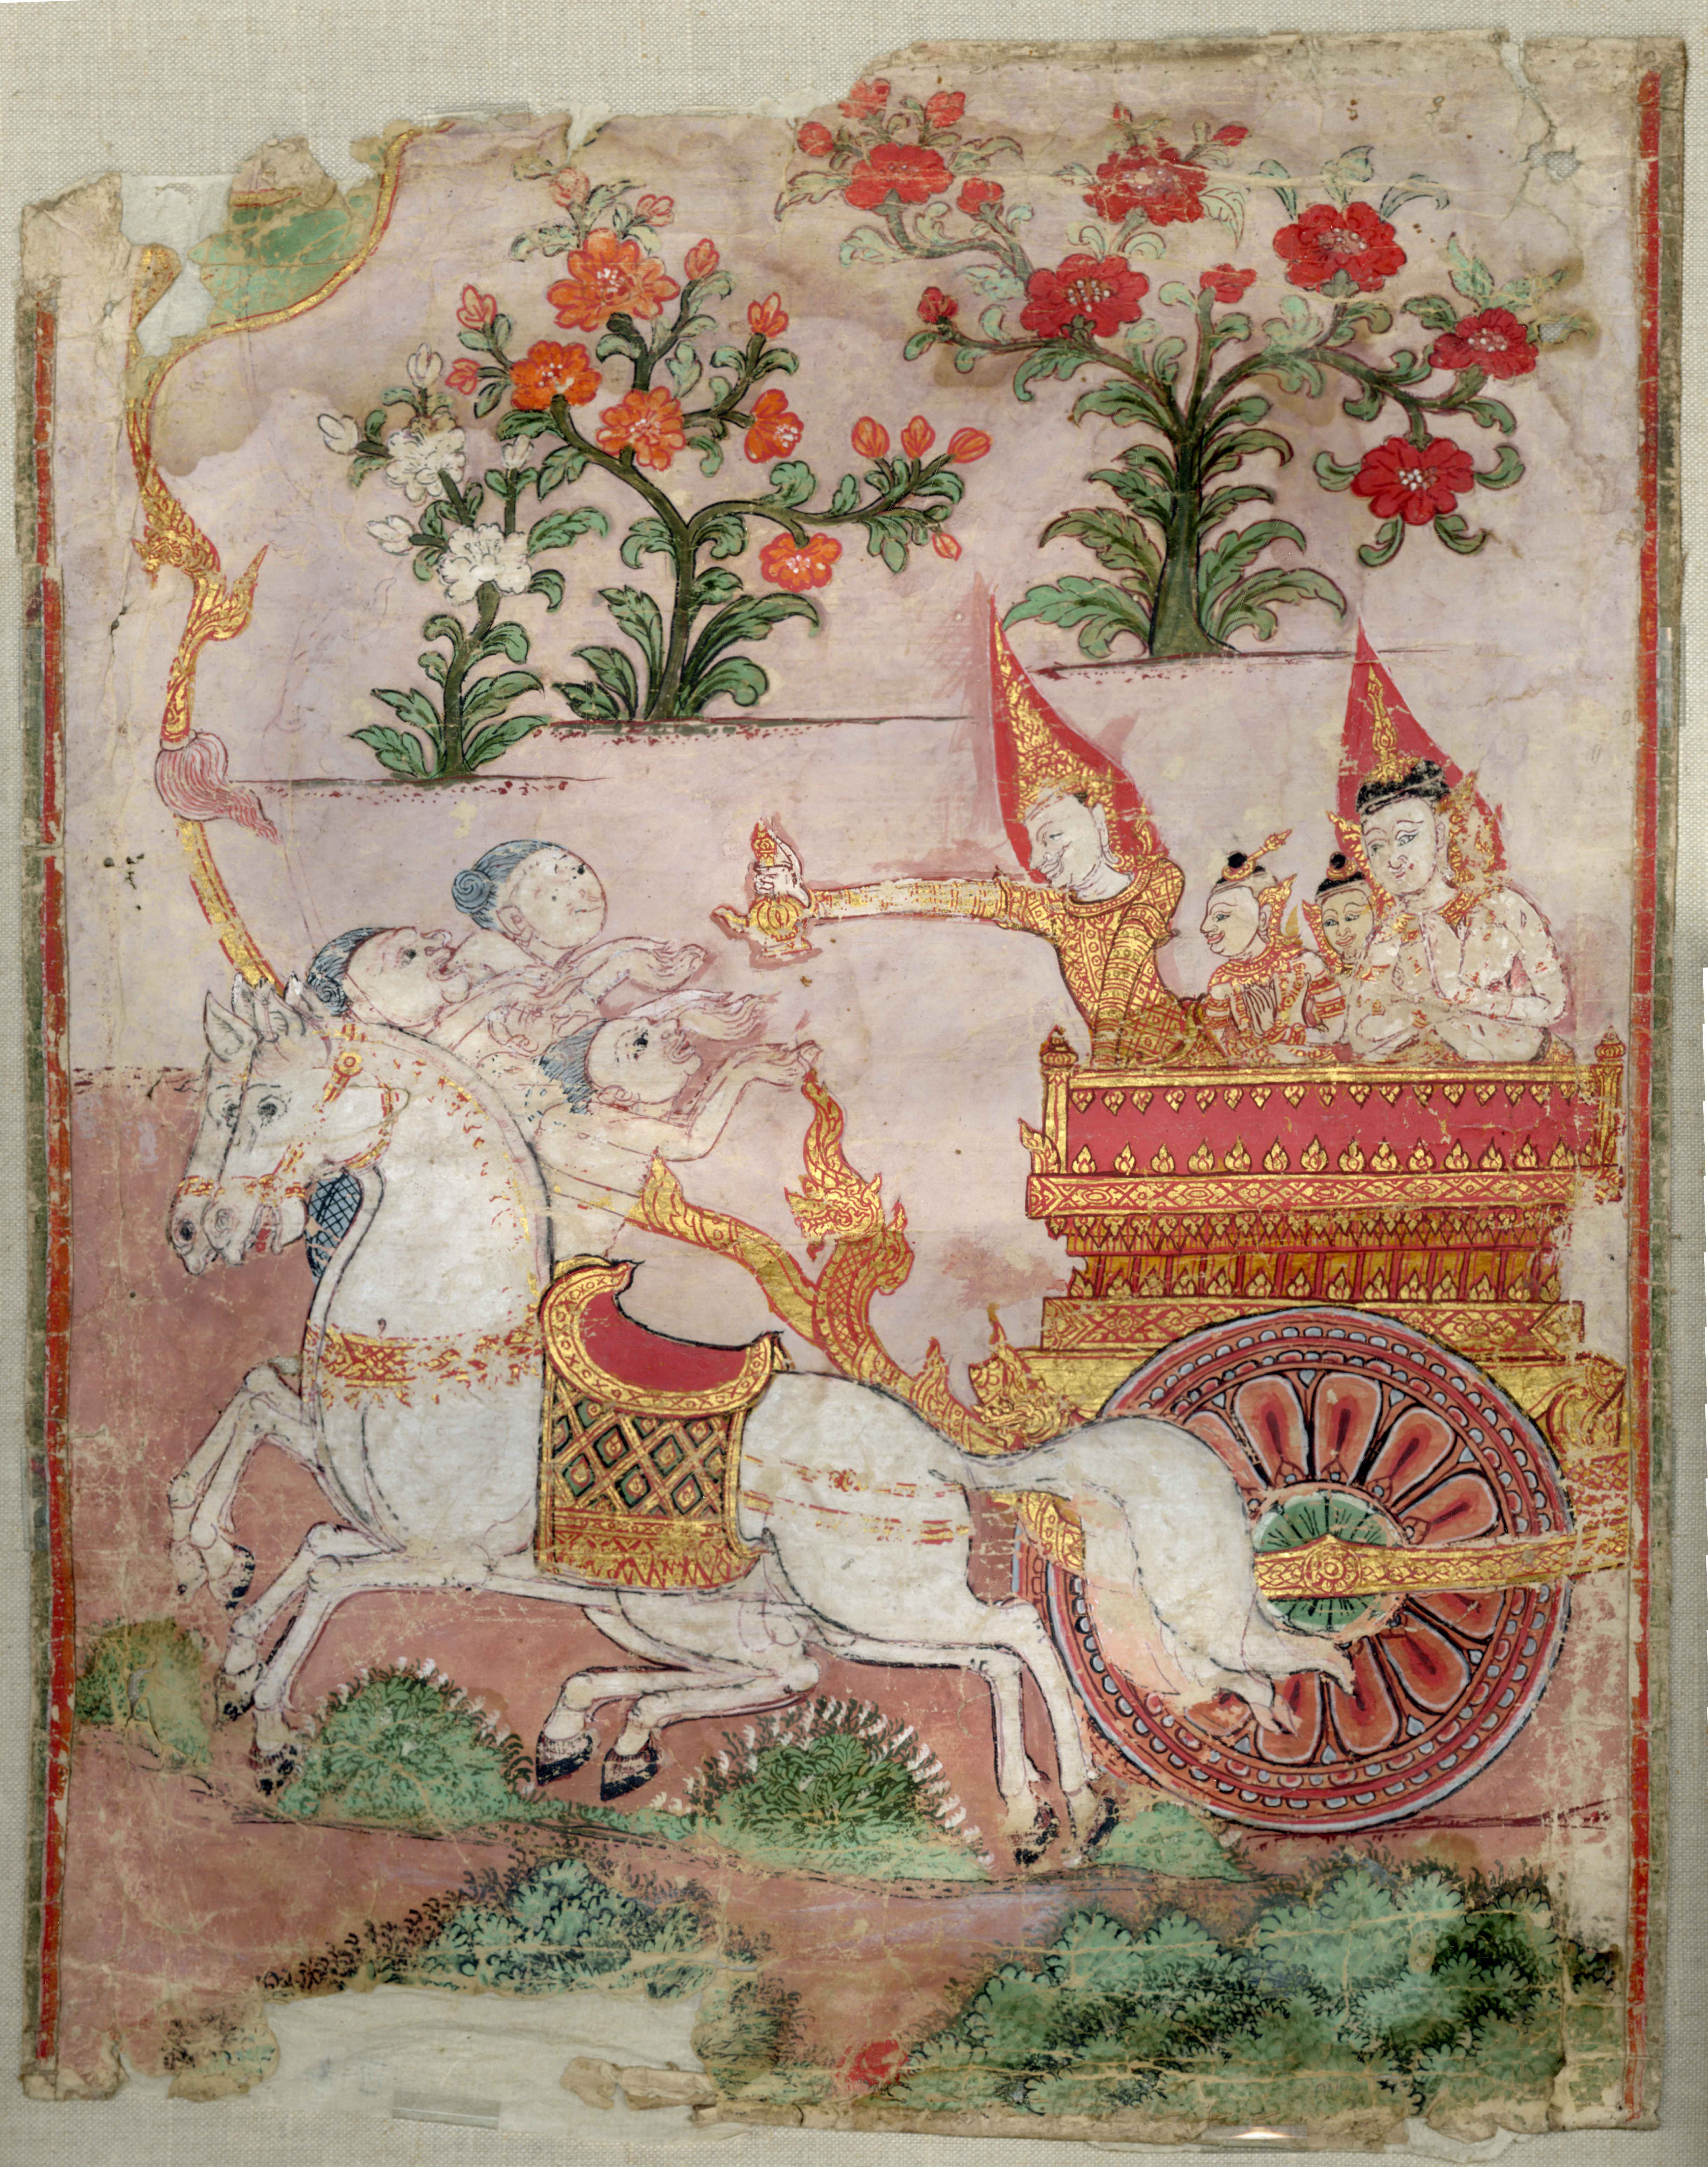 Two white horses pull a gold and red chariot which holds two adult and two children figures (also depicted in gold and red). One of the adult figures is offering something to three figures behind the horses. Plant and natural elements surround the figures and chariot.